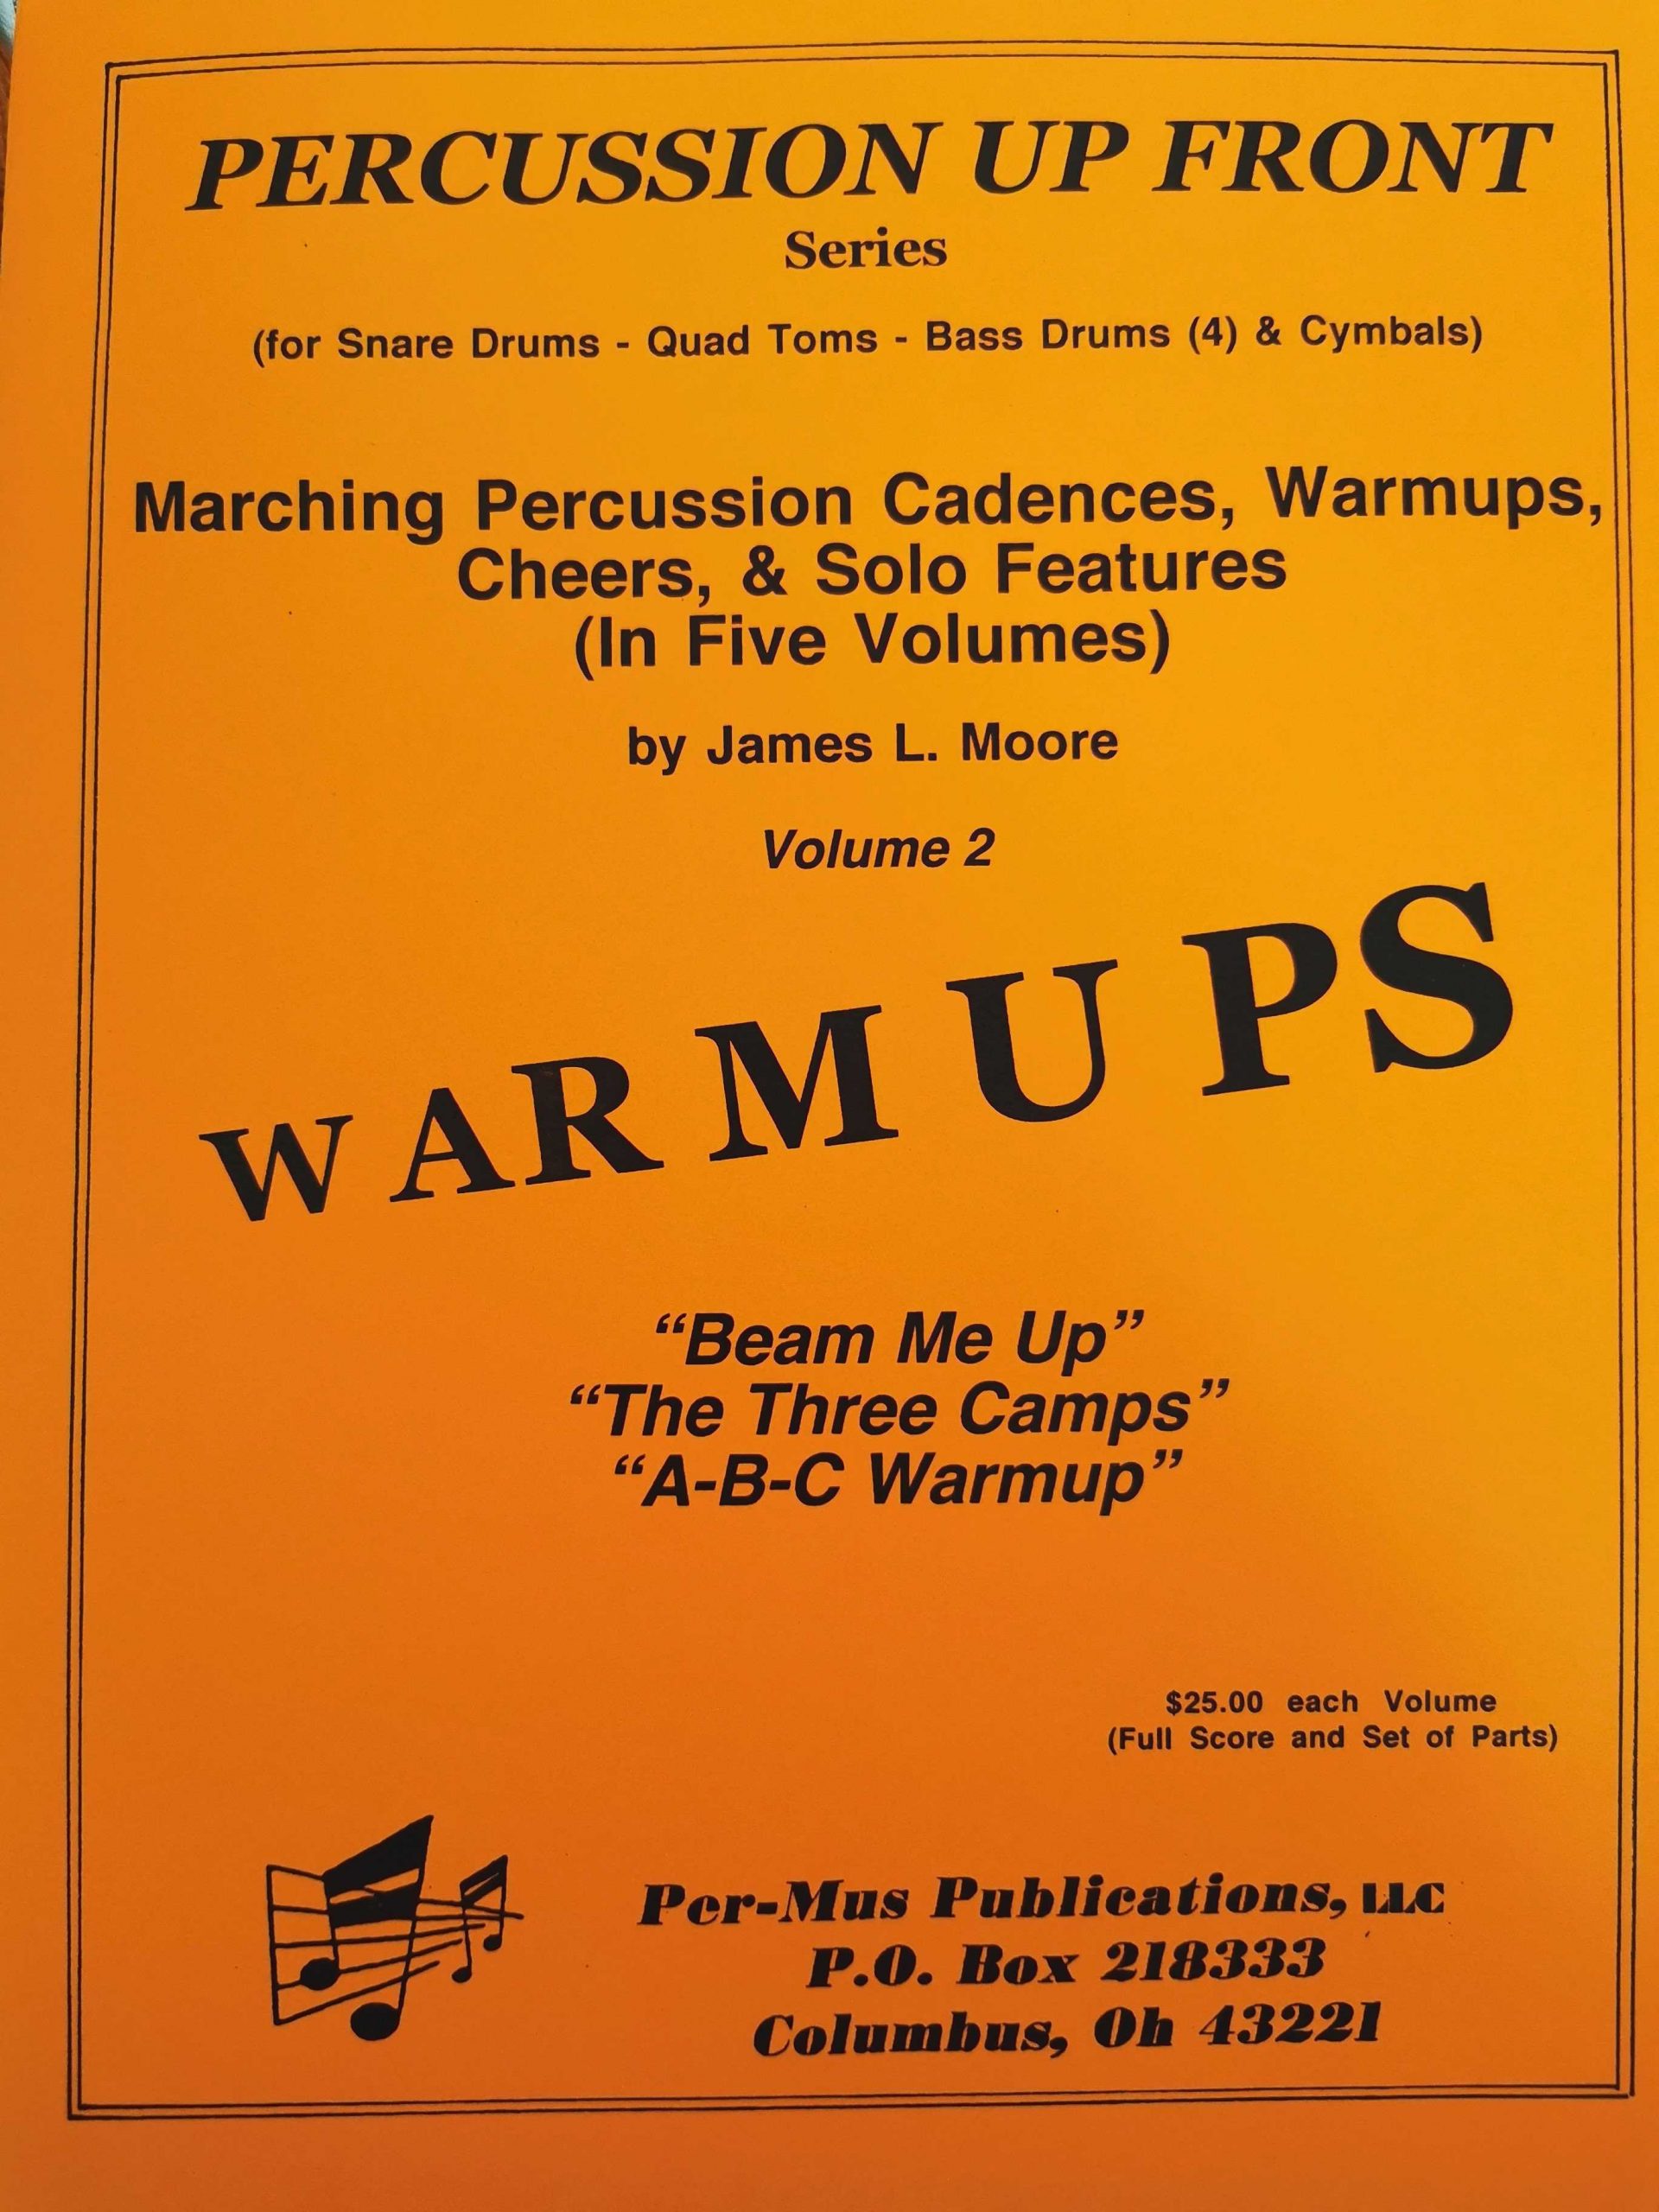 Percussion Up Front - Warmups vol. 2 by James Moore